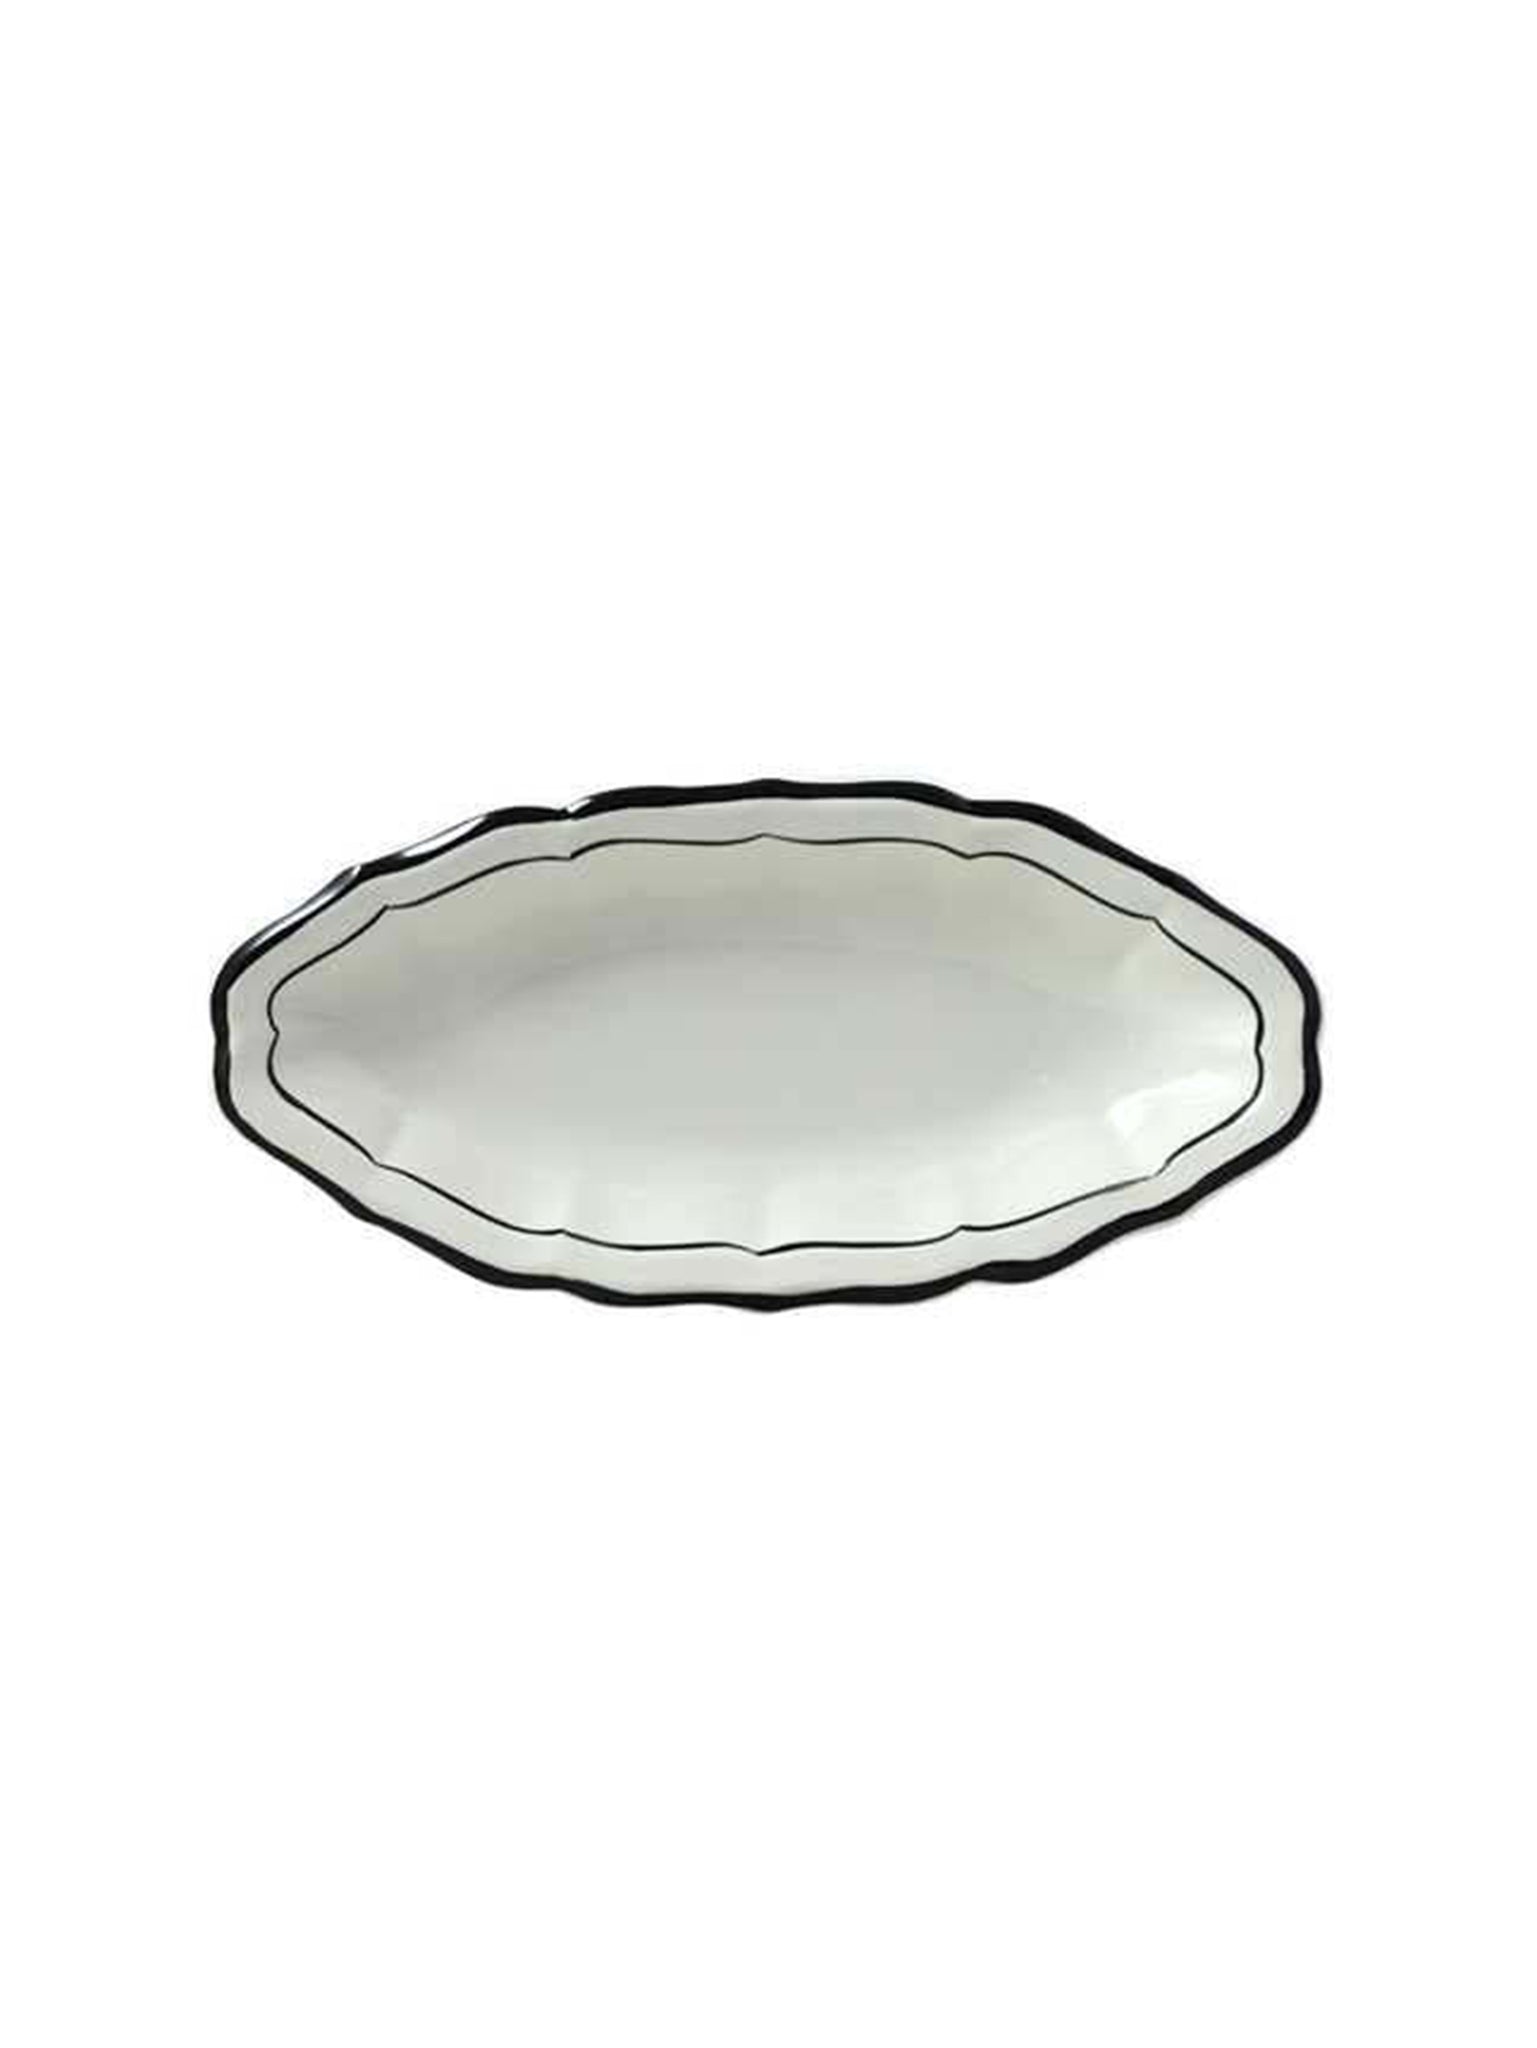 Gien Filet Midnight Pickle Dish Weston Table